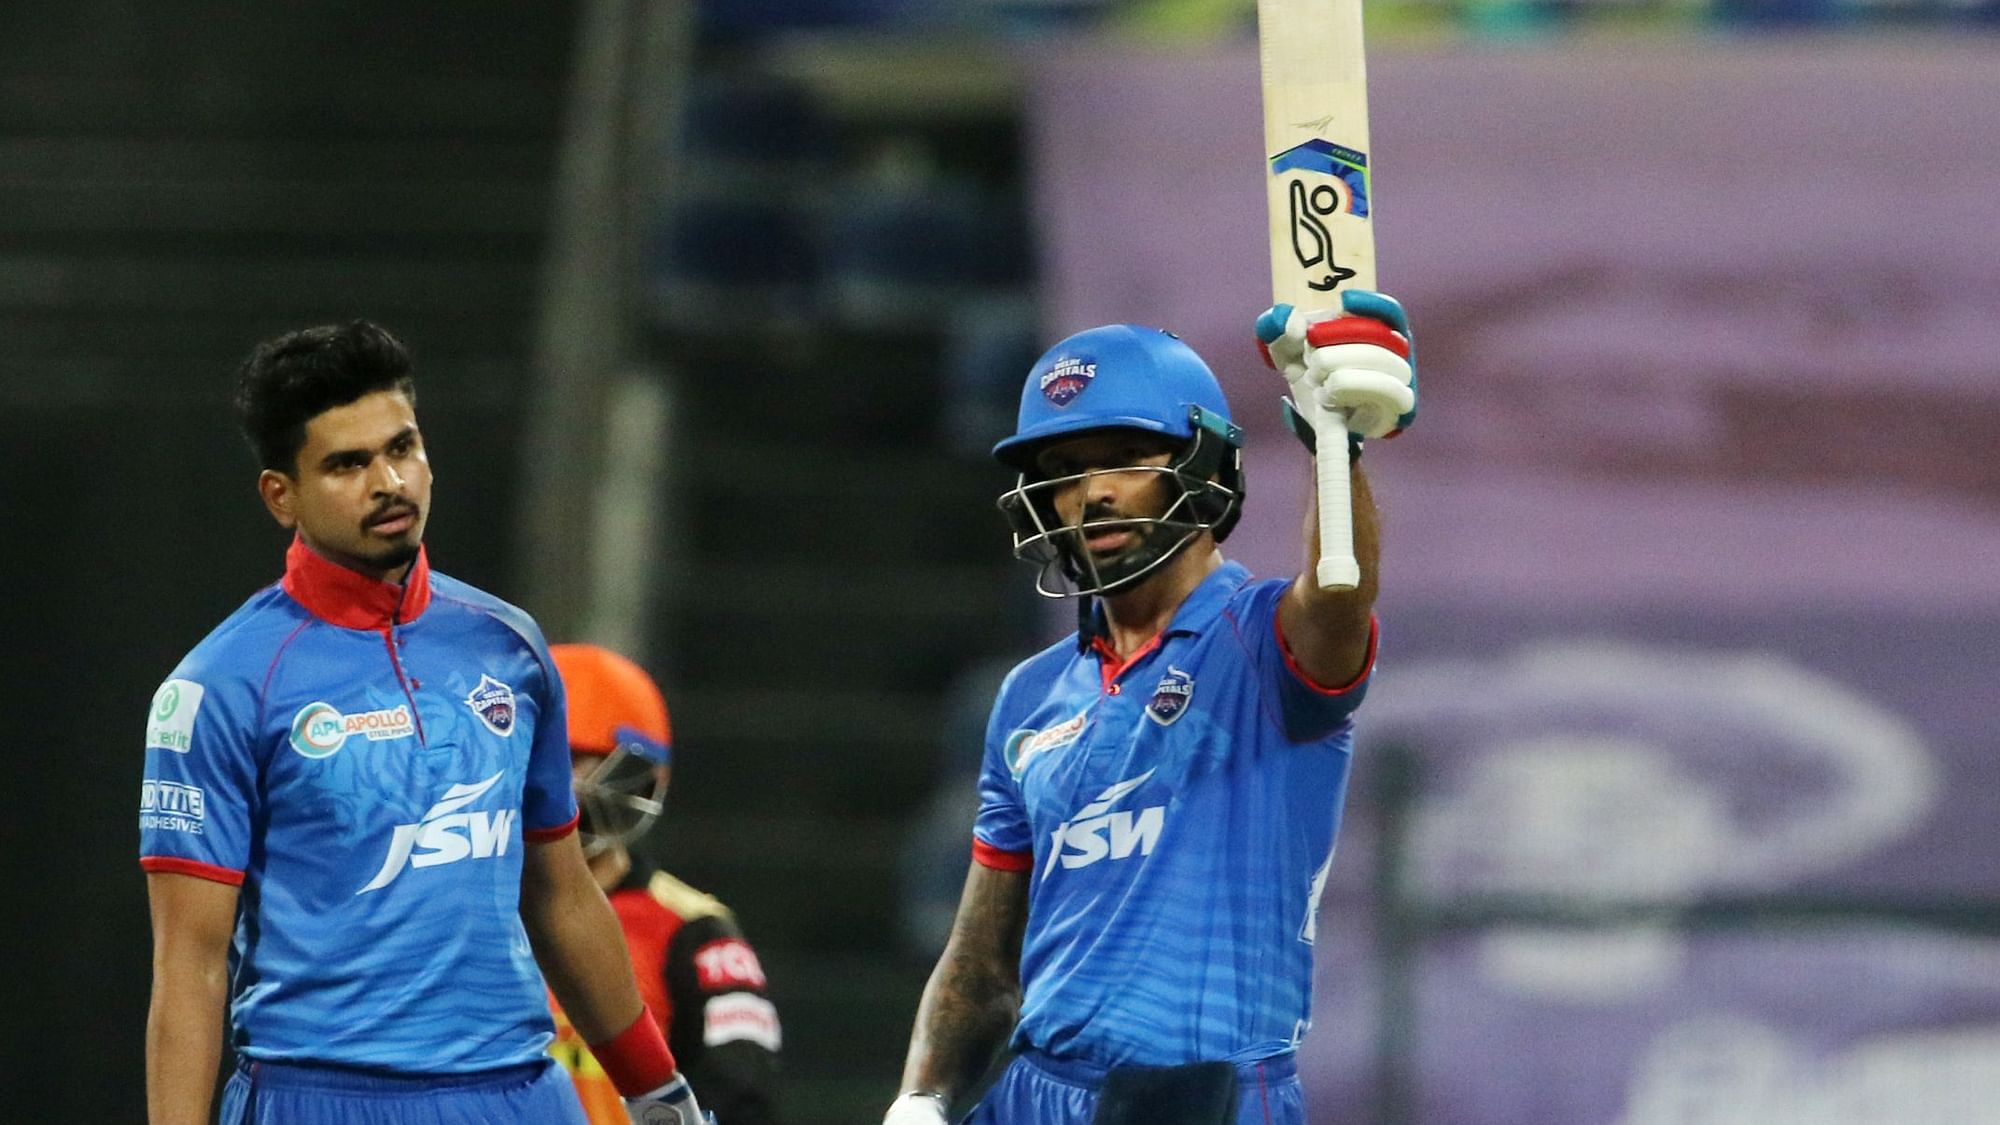 Riding on Shikhar Dhawan’s 78, Delhi Capitals posted a commanding 189/3 after electing to bat first in Qualifier 2.